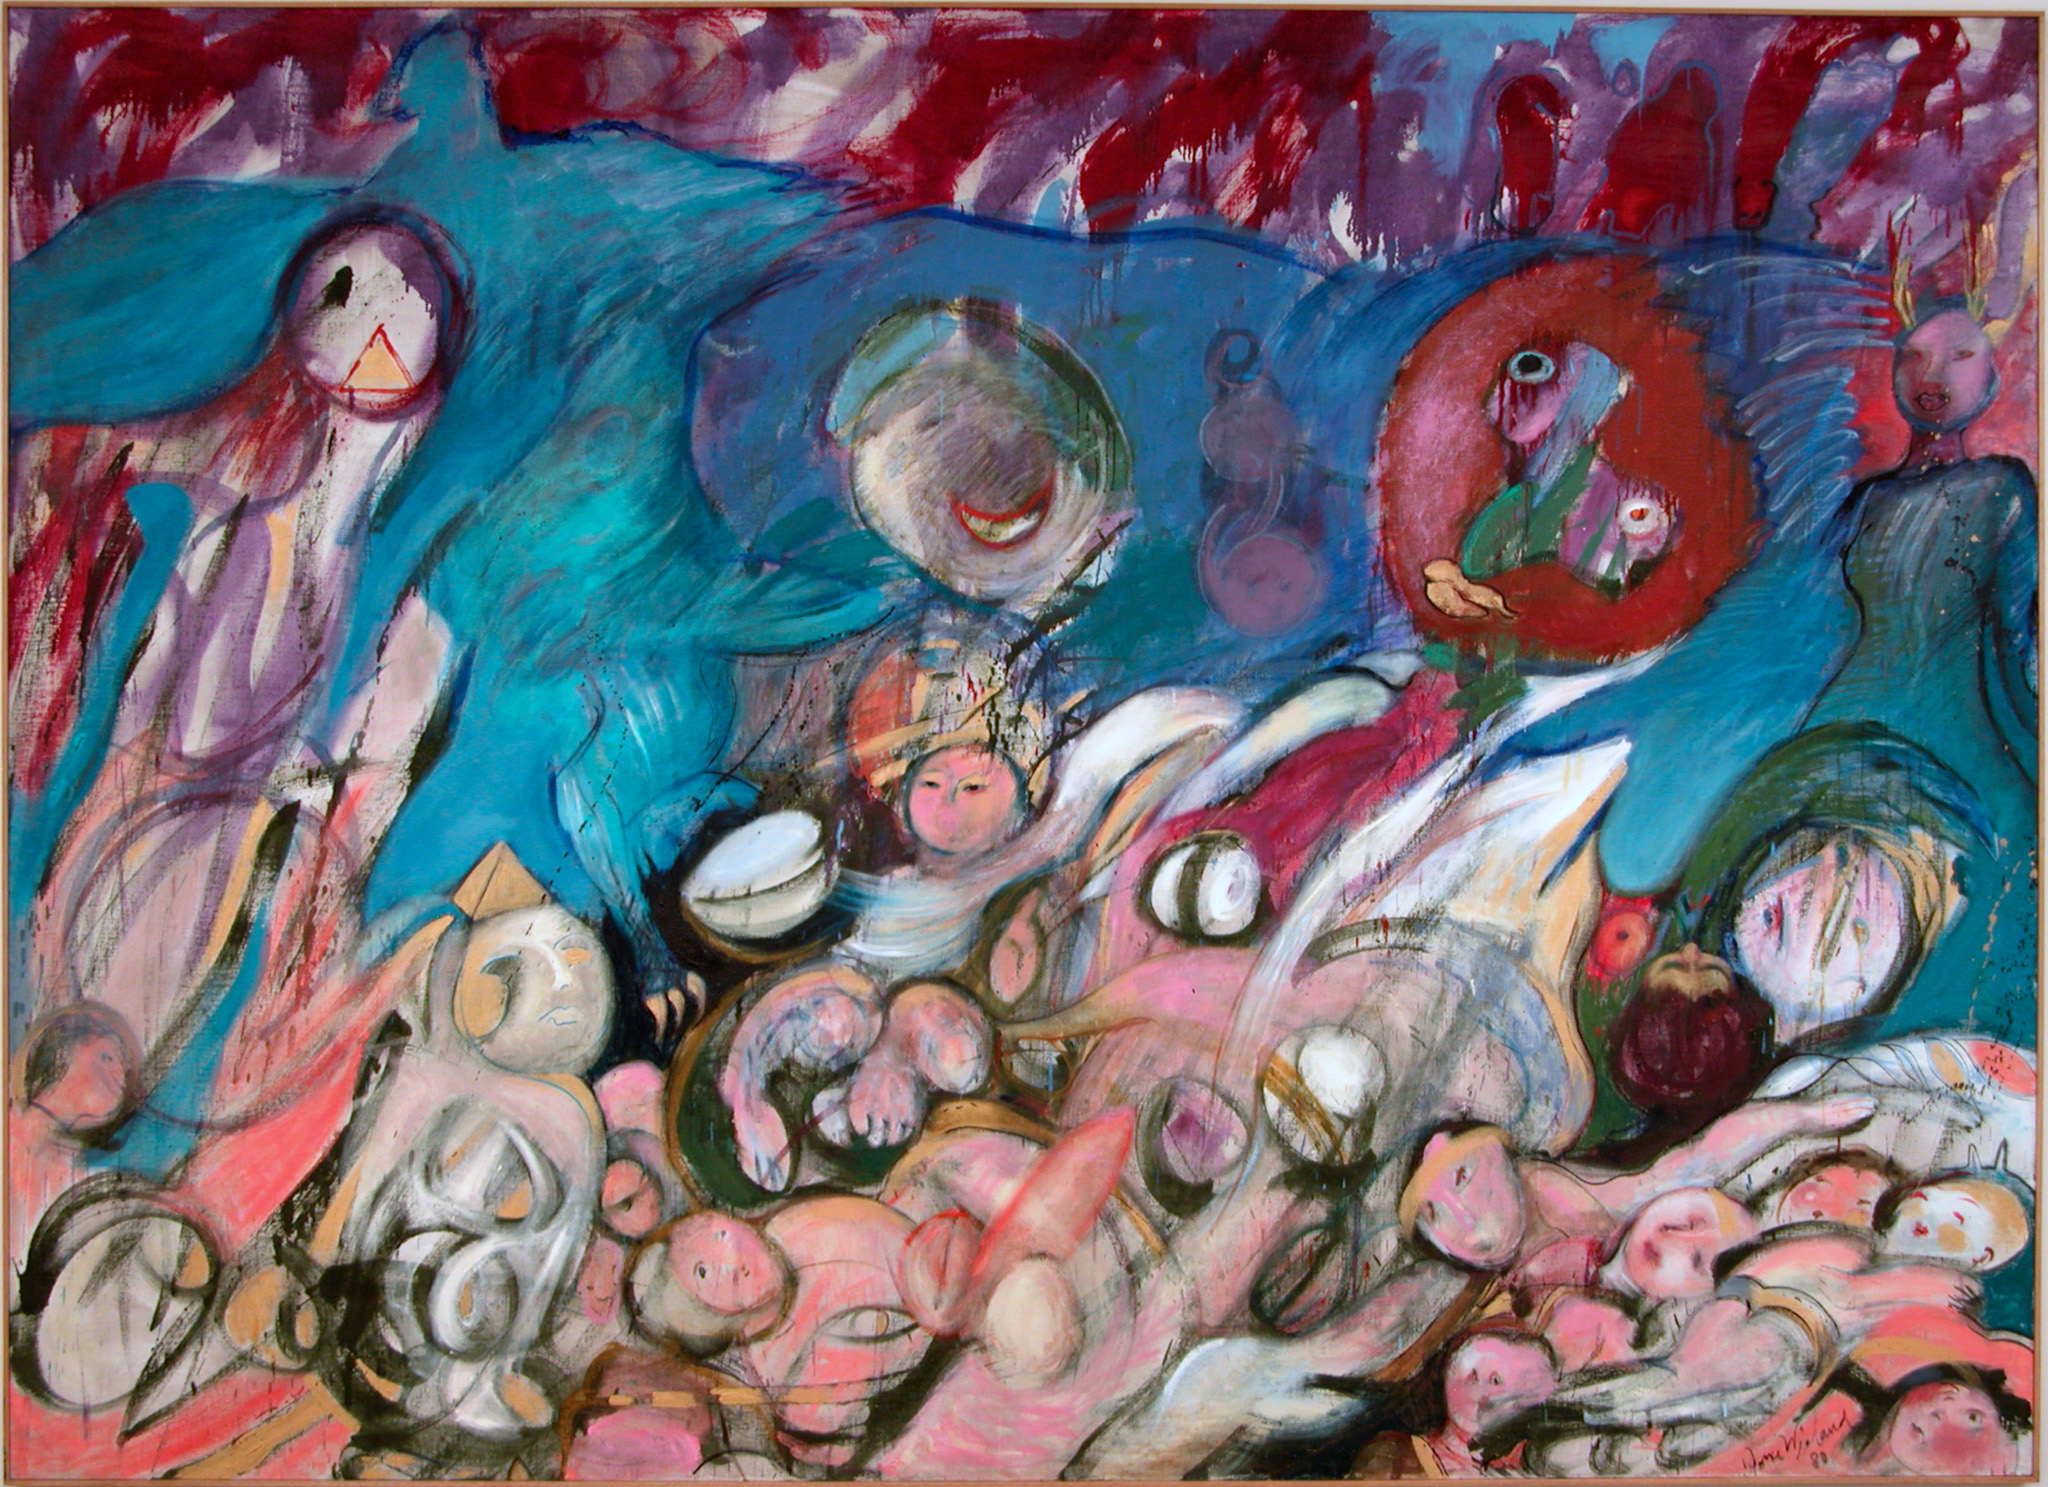 Joyce Wieland's Male Fertility is a painting in peach, pink, red and blue tones.